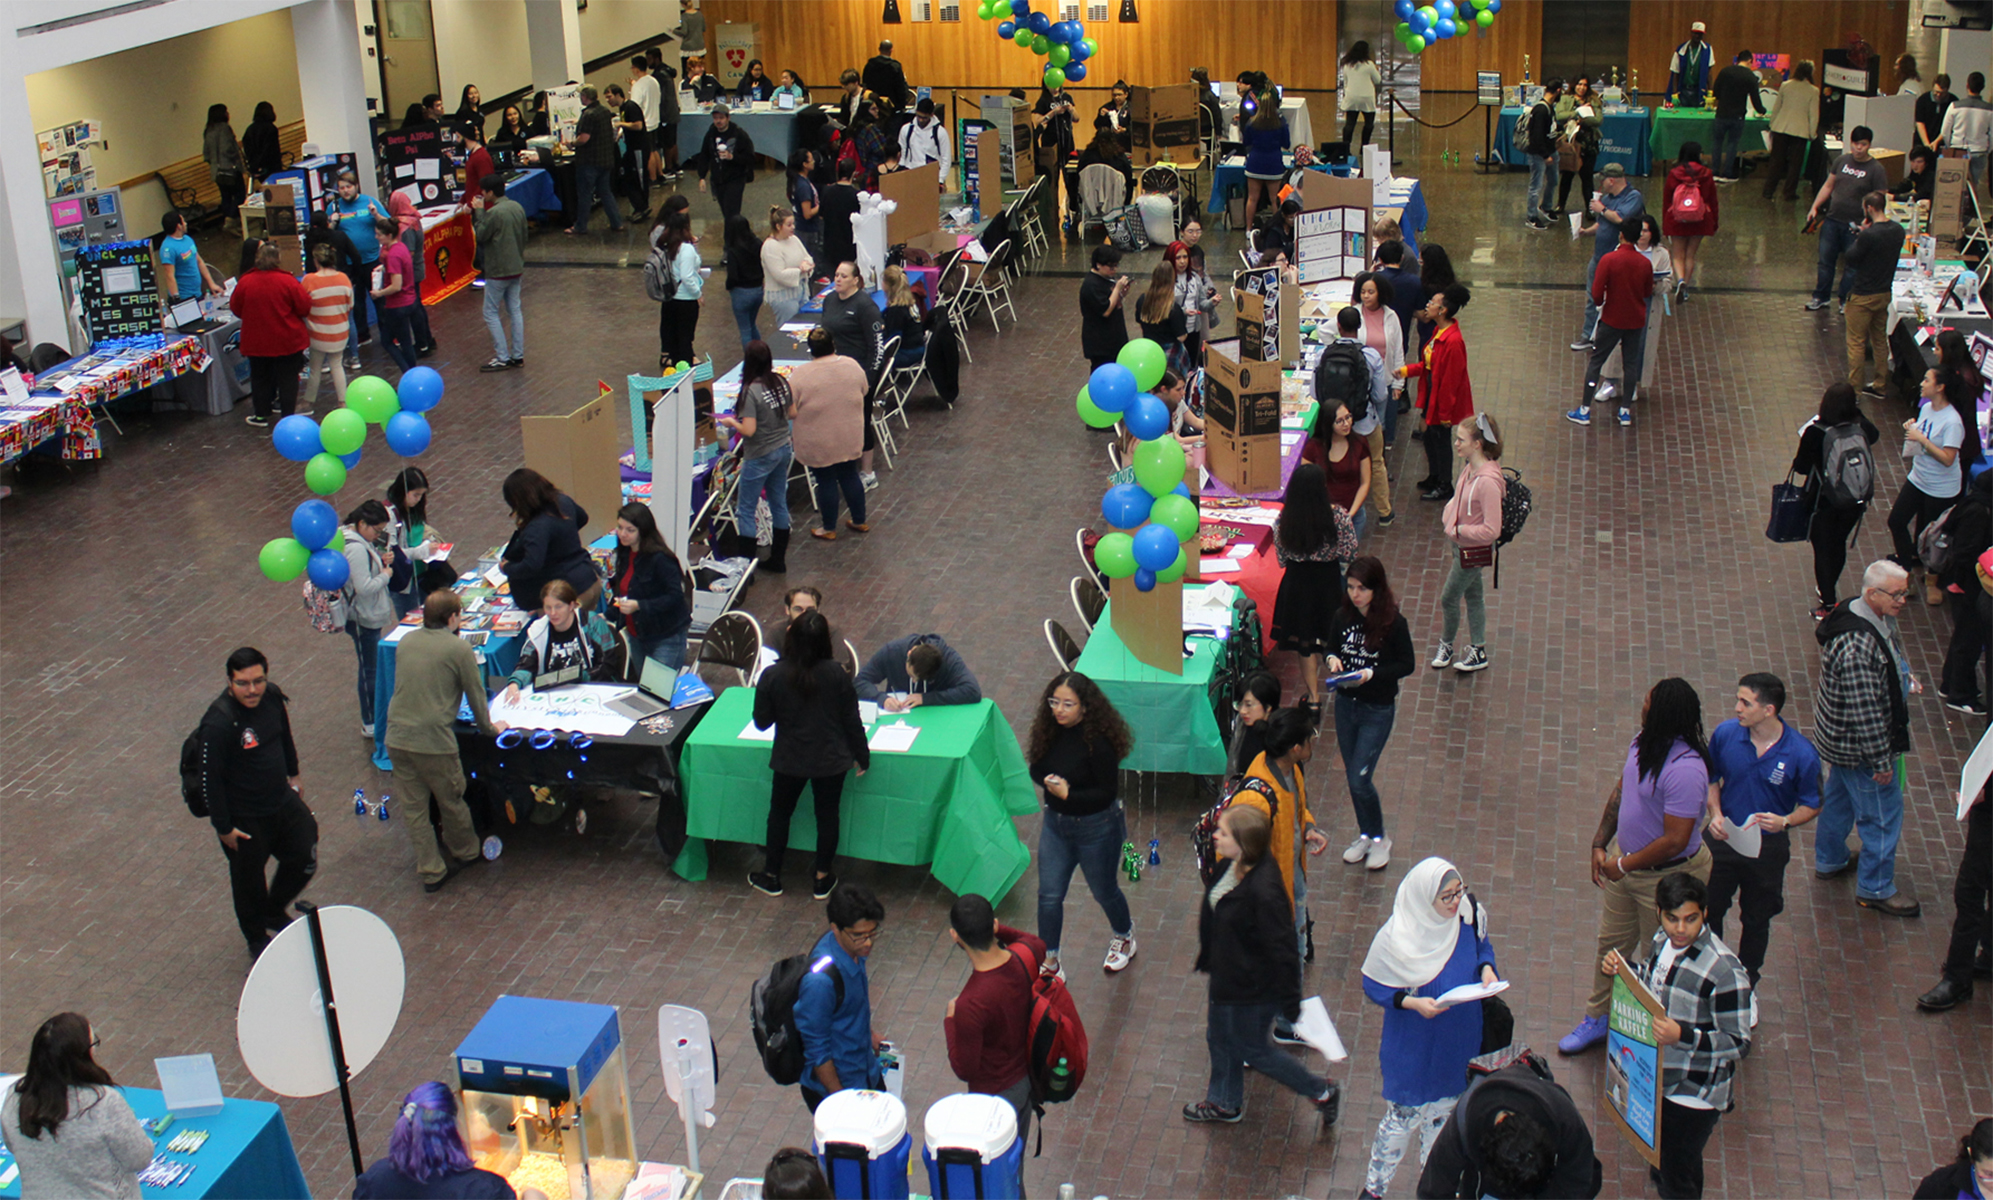 PHOTO: Student overlooks the student organization exposition from the second floor. Photo by: Signal reporter Aimee Kubena.